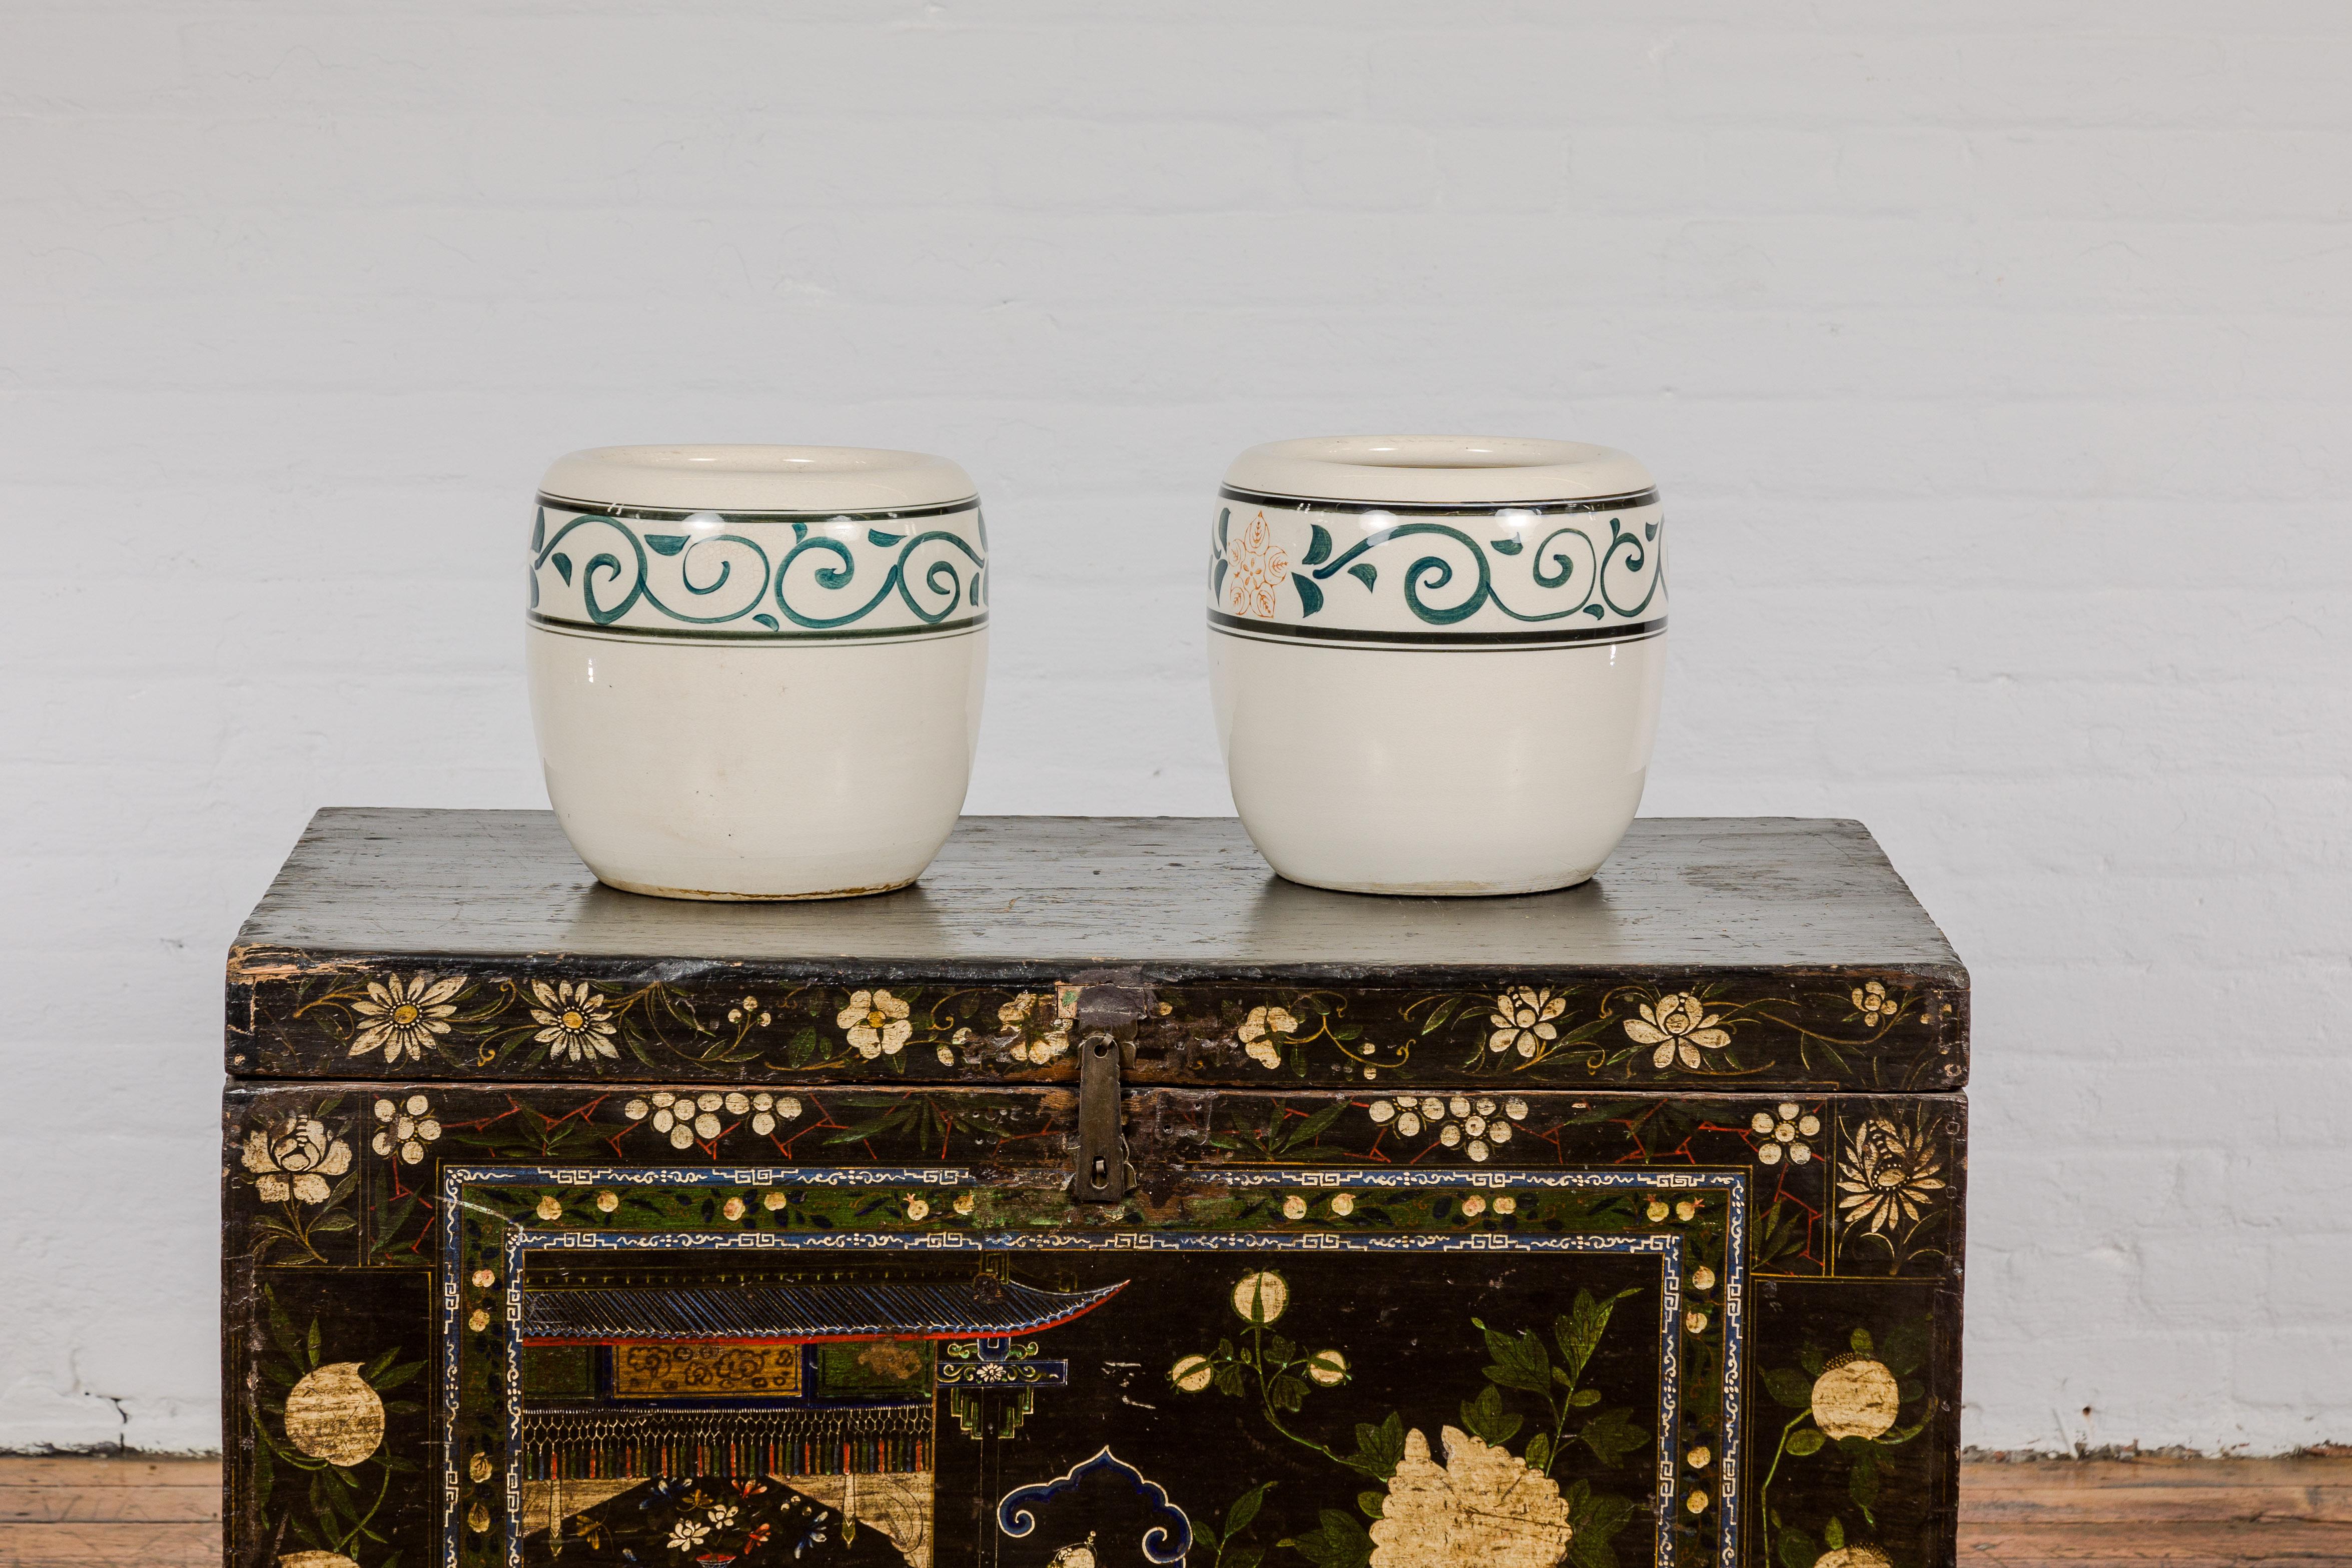 Pair of Late Qing Dynasty Ceramic Planters with Green Floral Décor For Sale 10